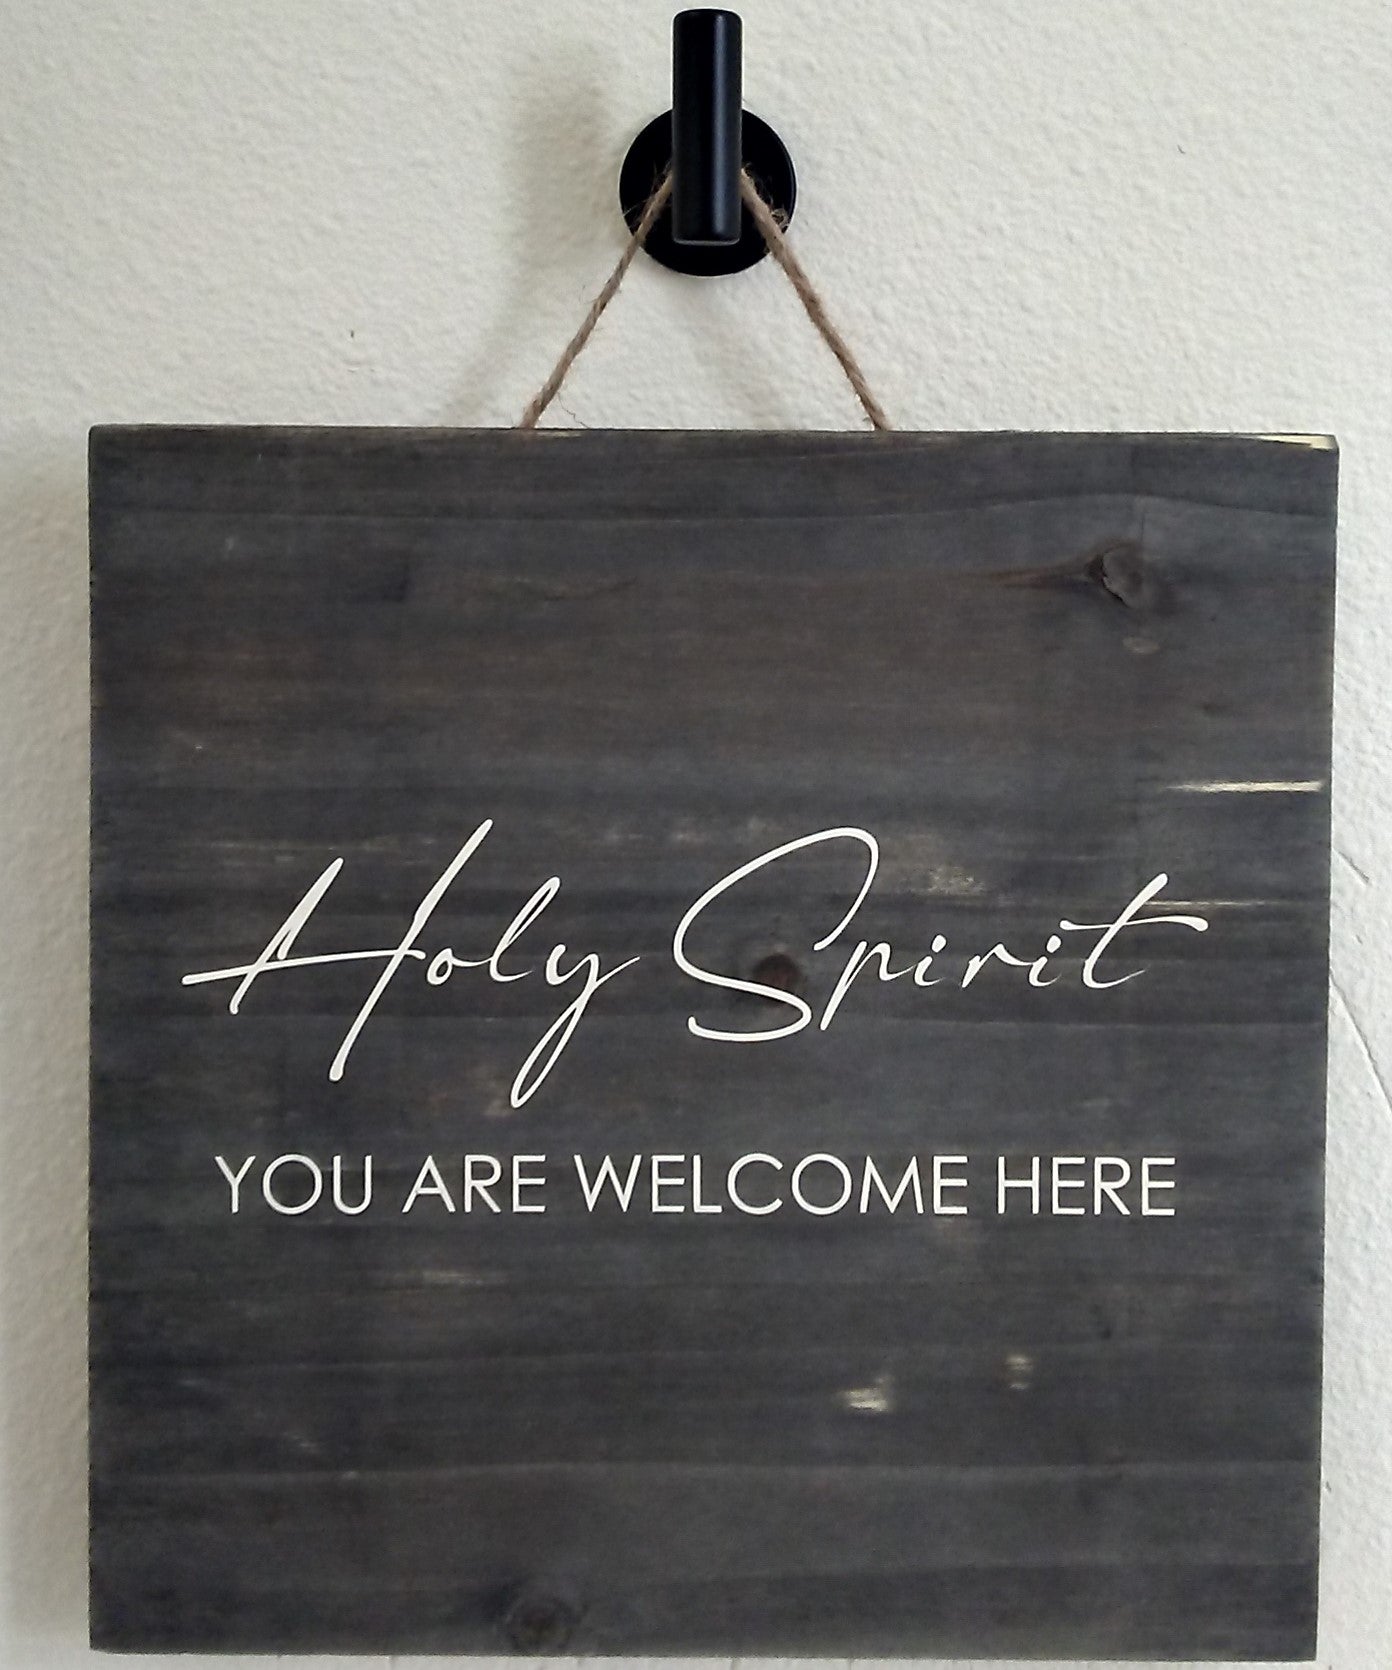 "Holy Spirit You are Welcome Here." Cream colored text on grey-brown square (10"x10") wood sign.